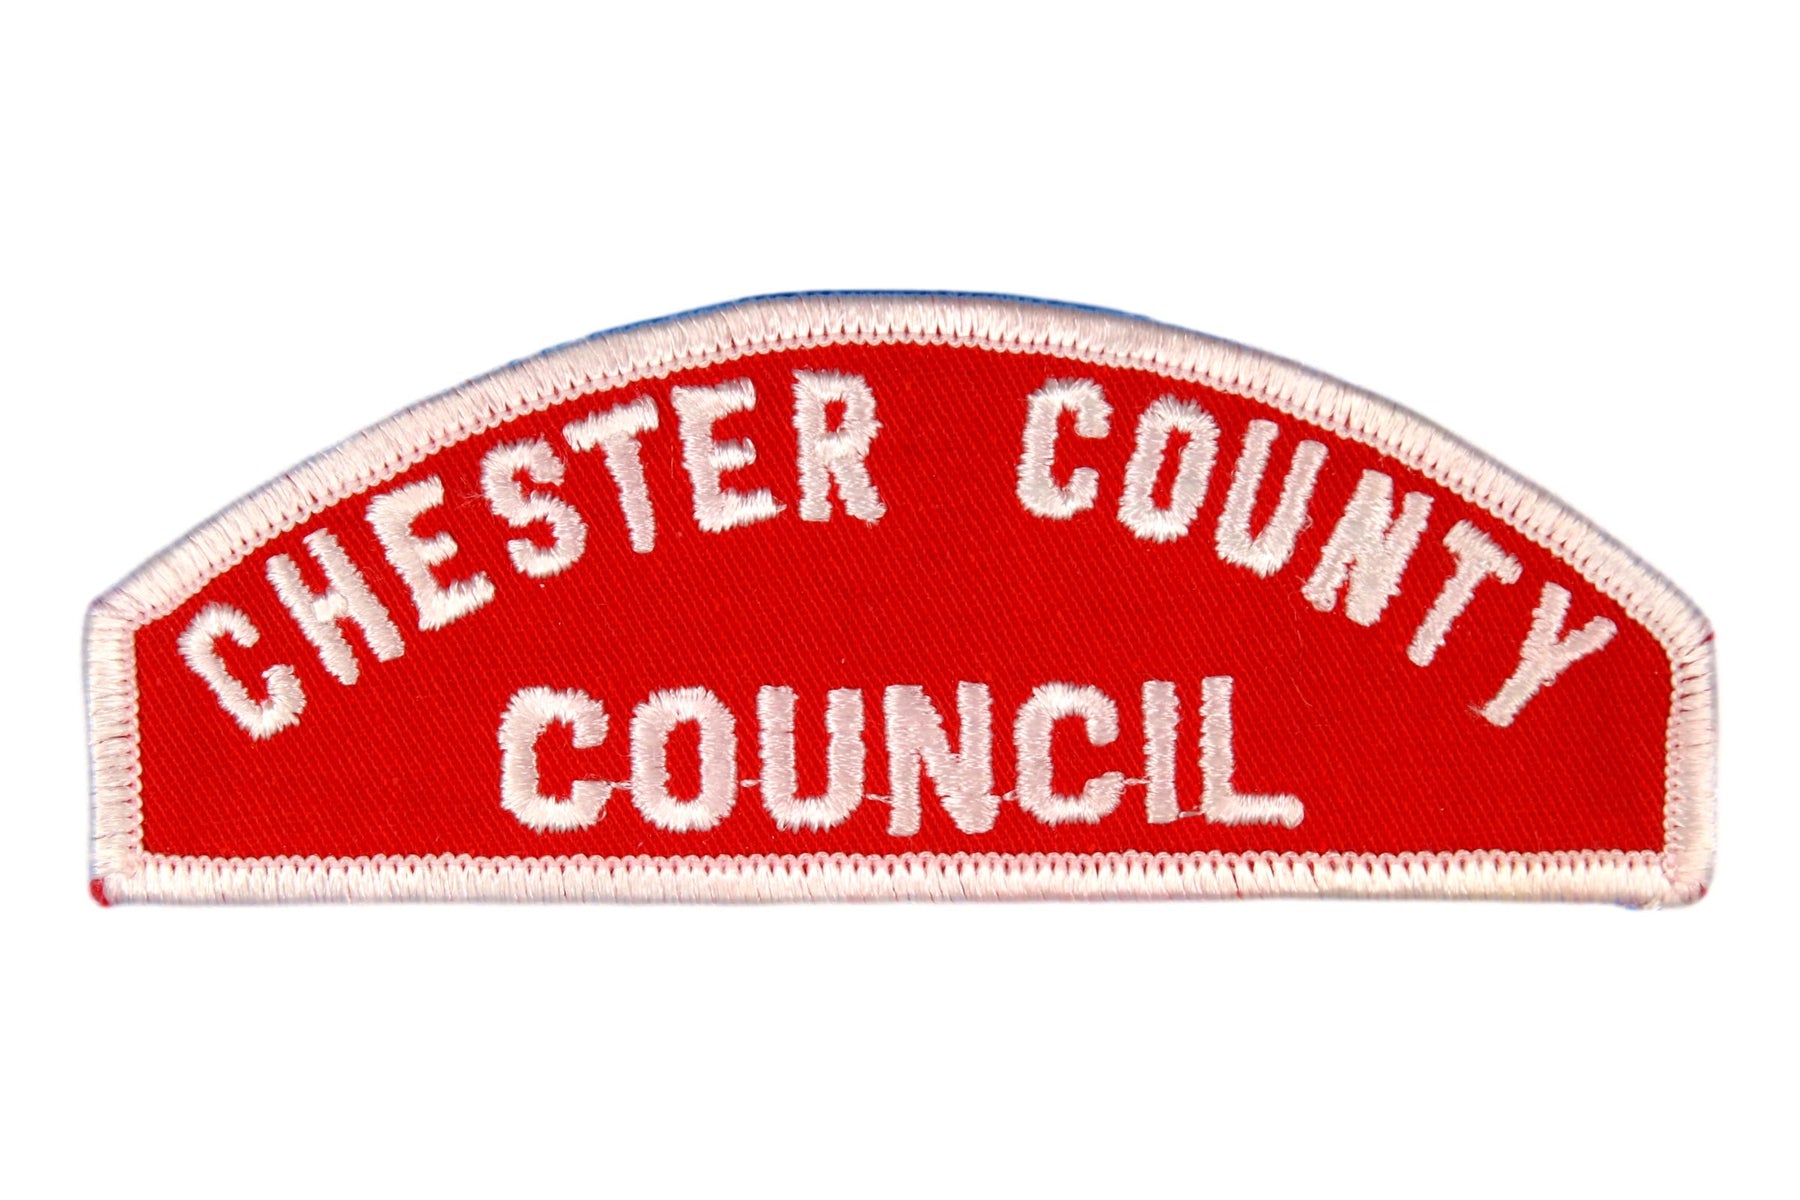 Chester County Red and White Council Strip